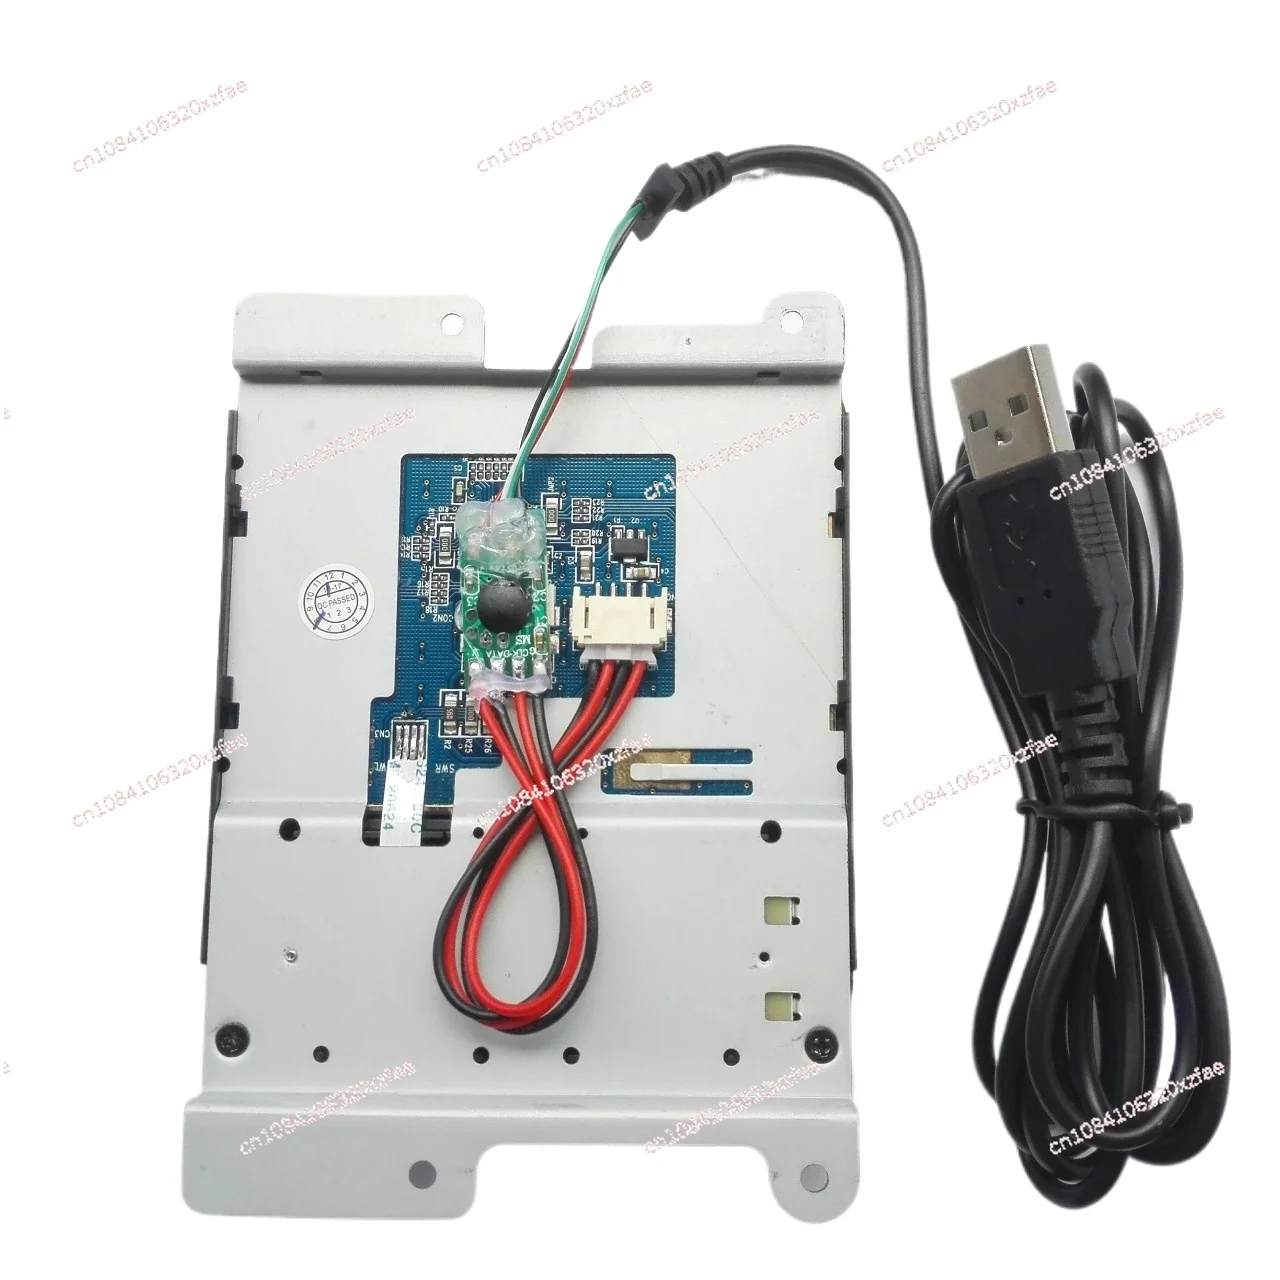 

With Page Turning Function Industrial CNC Cabinet Security Embedded Can Be Installed Touch Screen Industrial Control USB Mouse